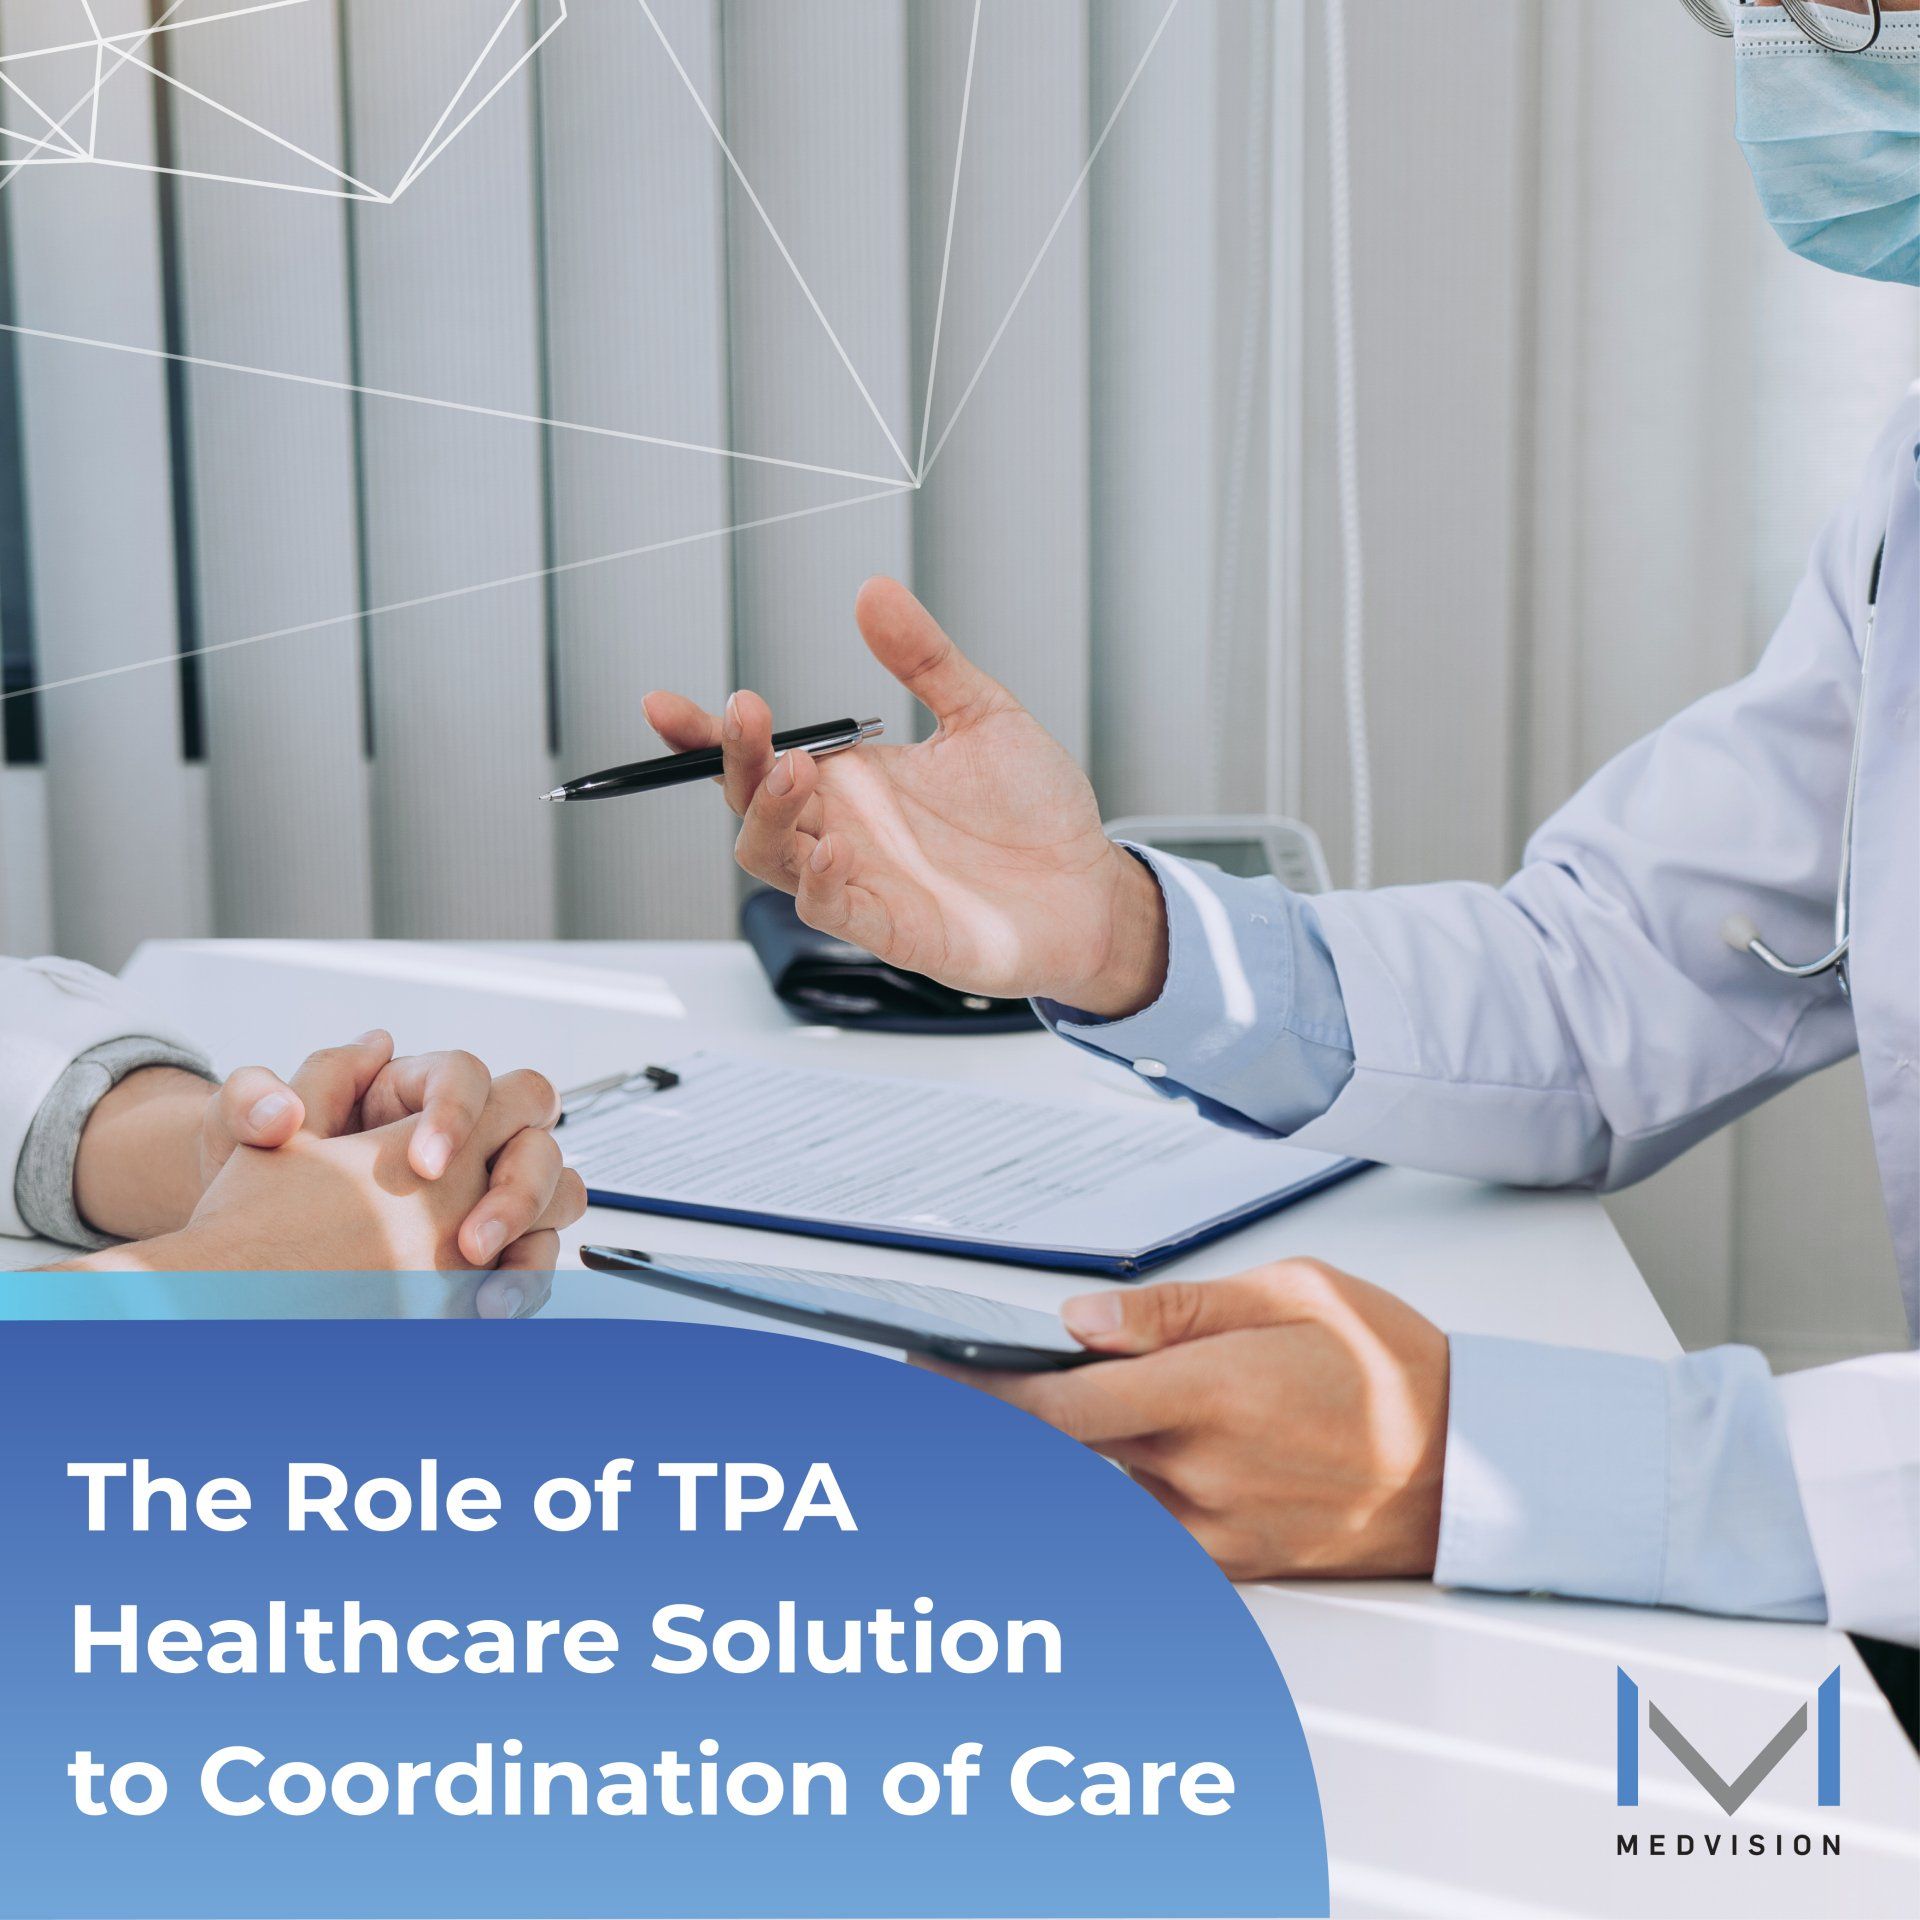 The Role of TPA Healthcare Solution to Coordination of Care